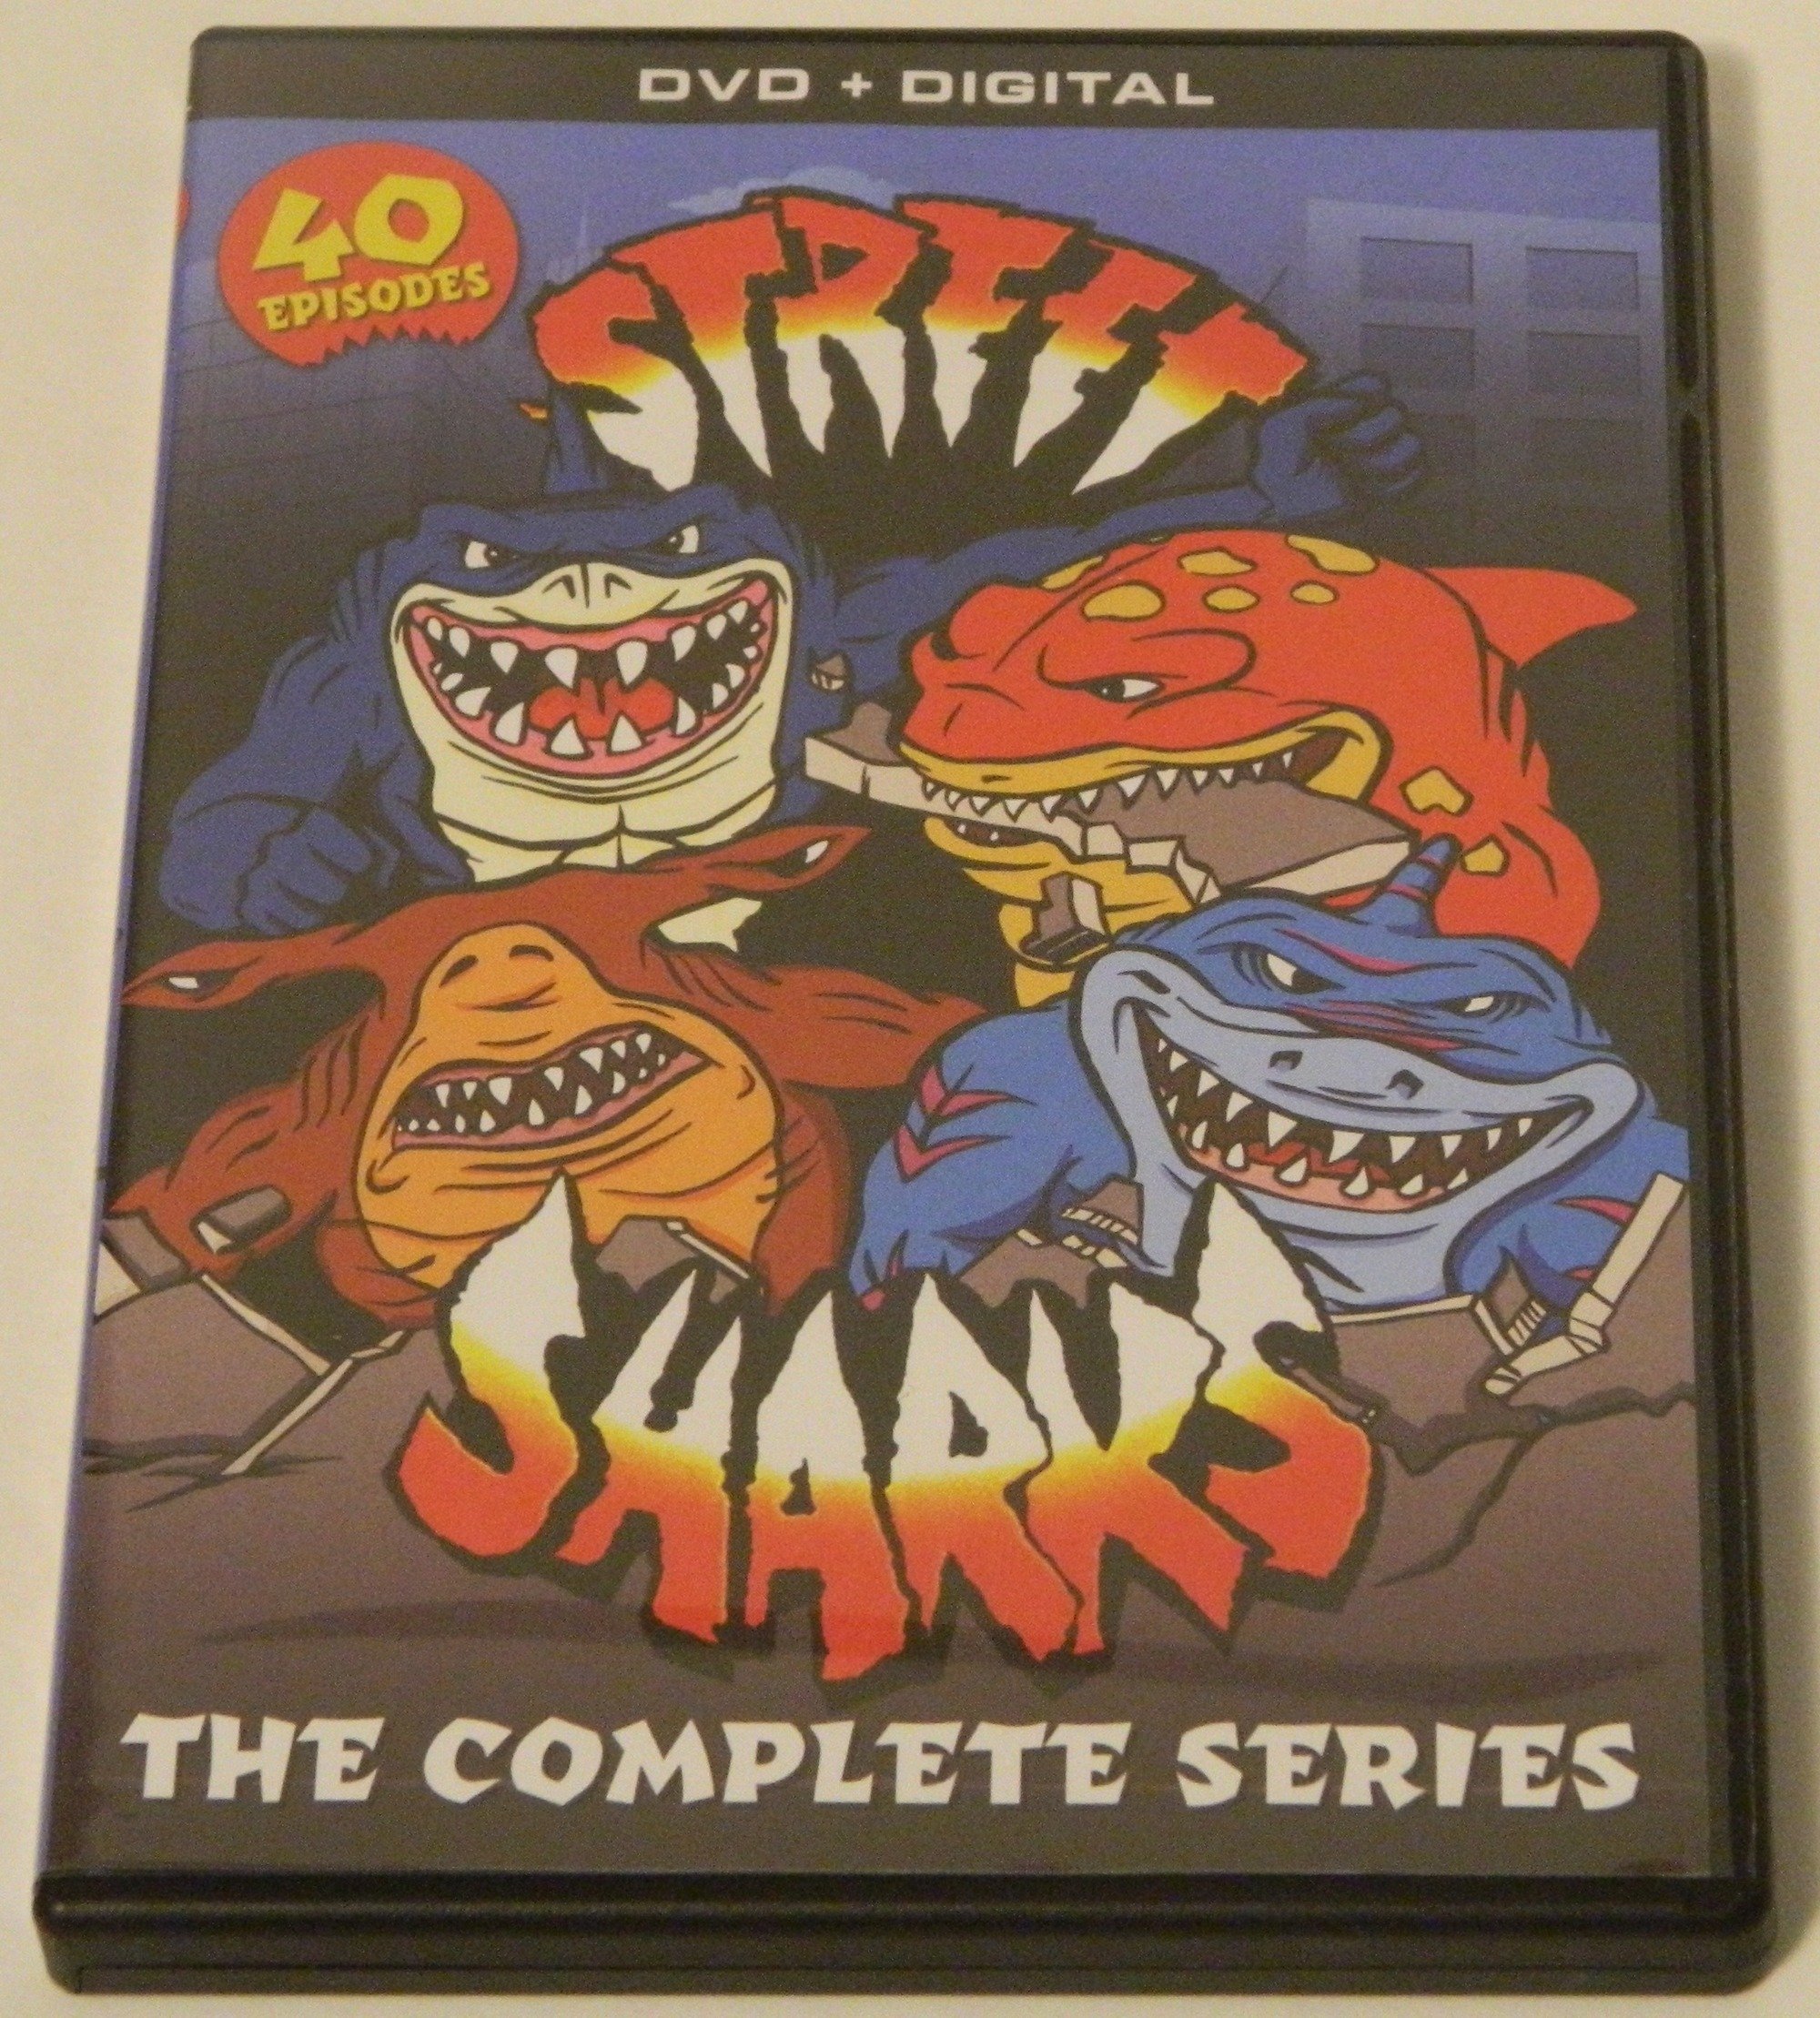 Street Sharks: The Complete Series DVD Review